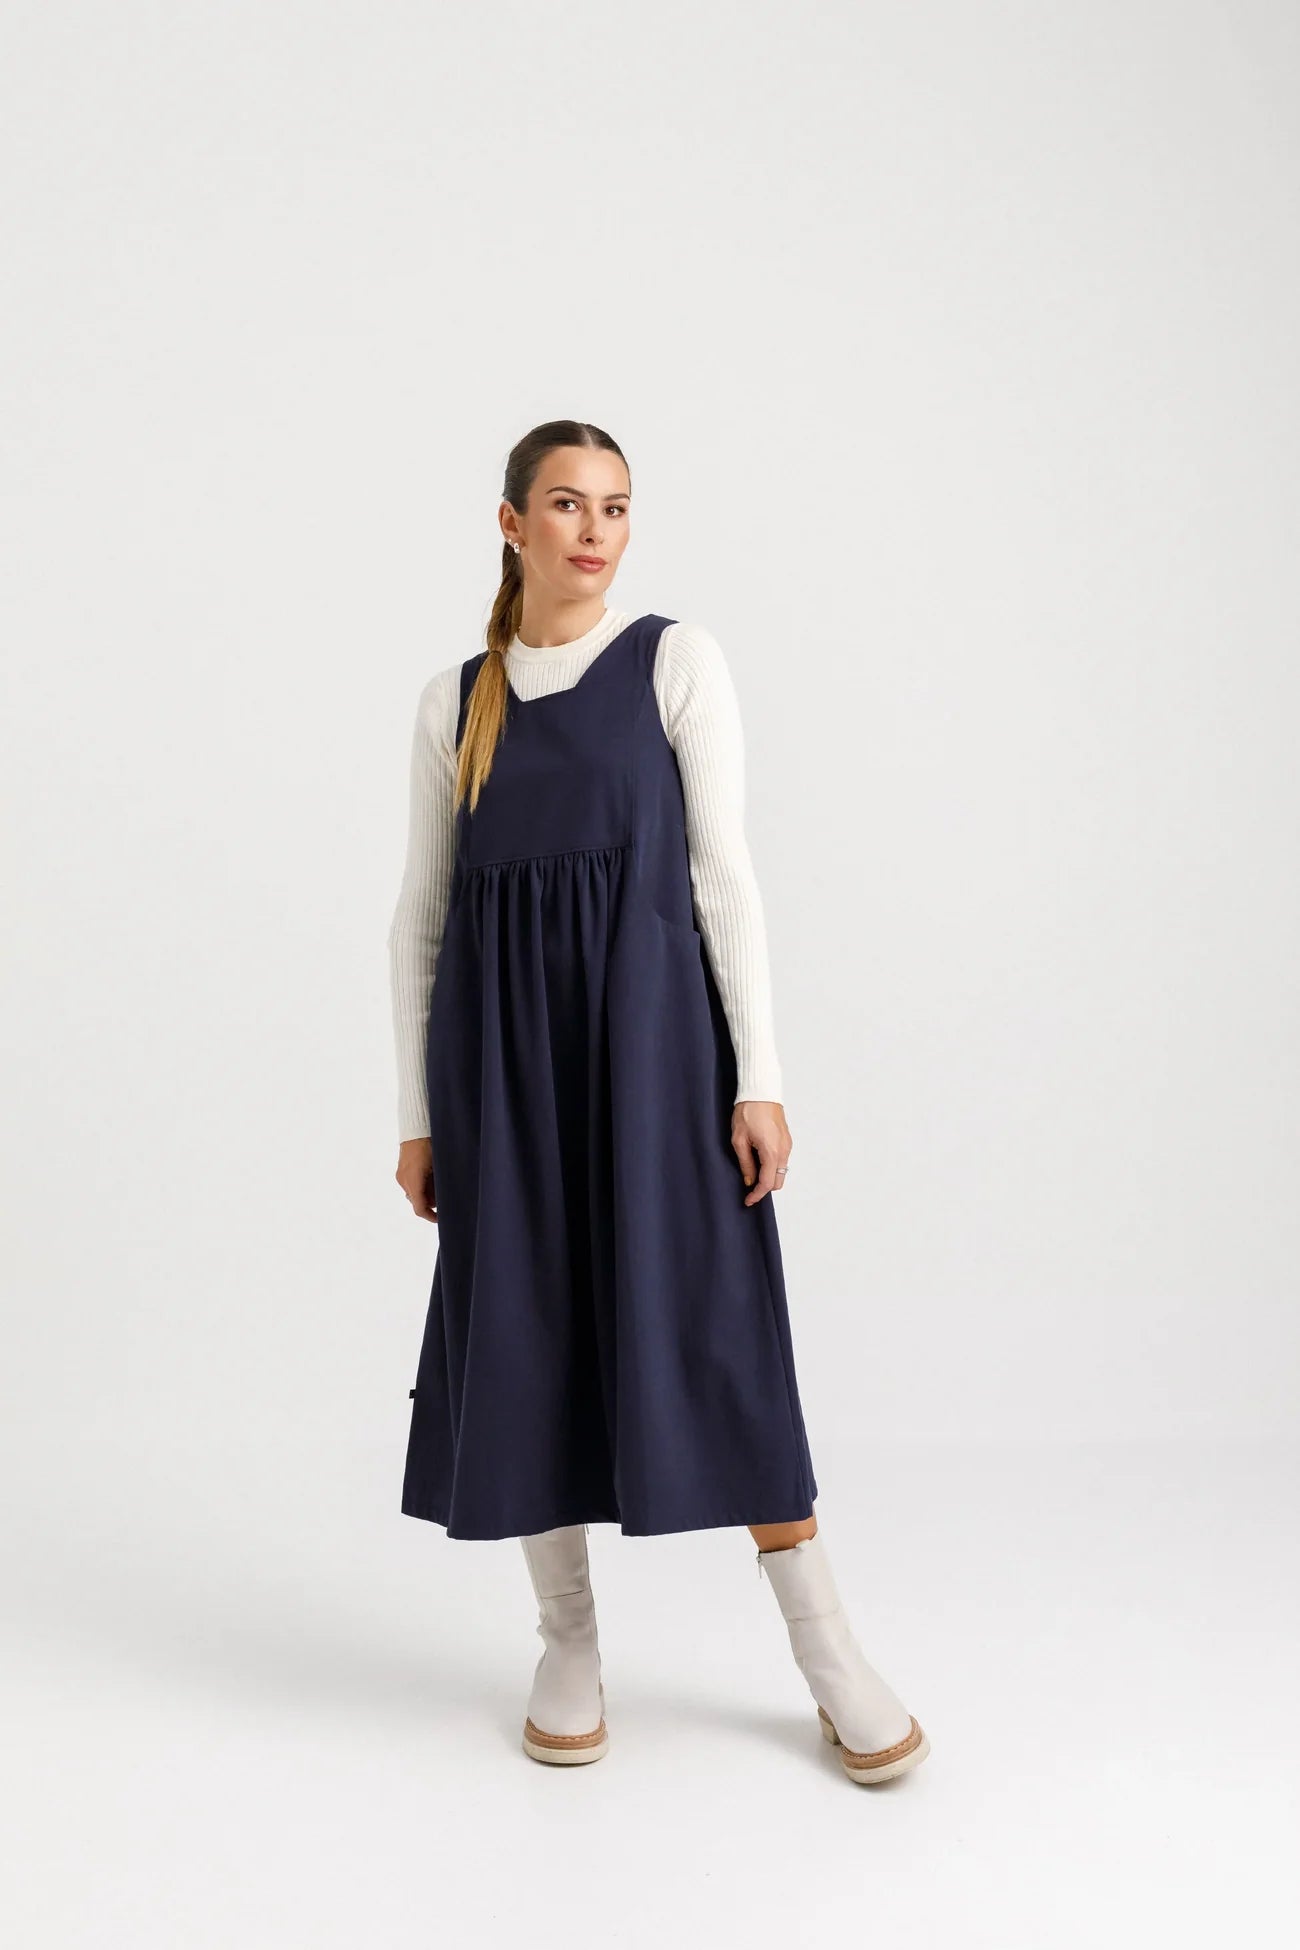 Thing Thing Easeful dress - Navy